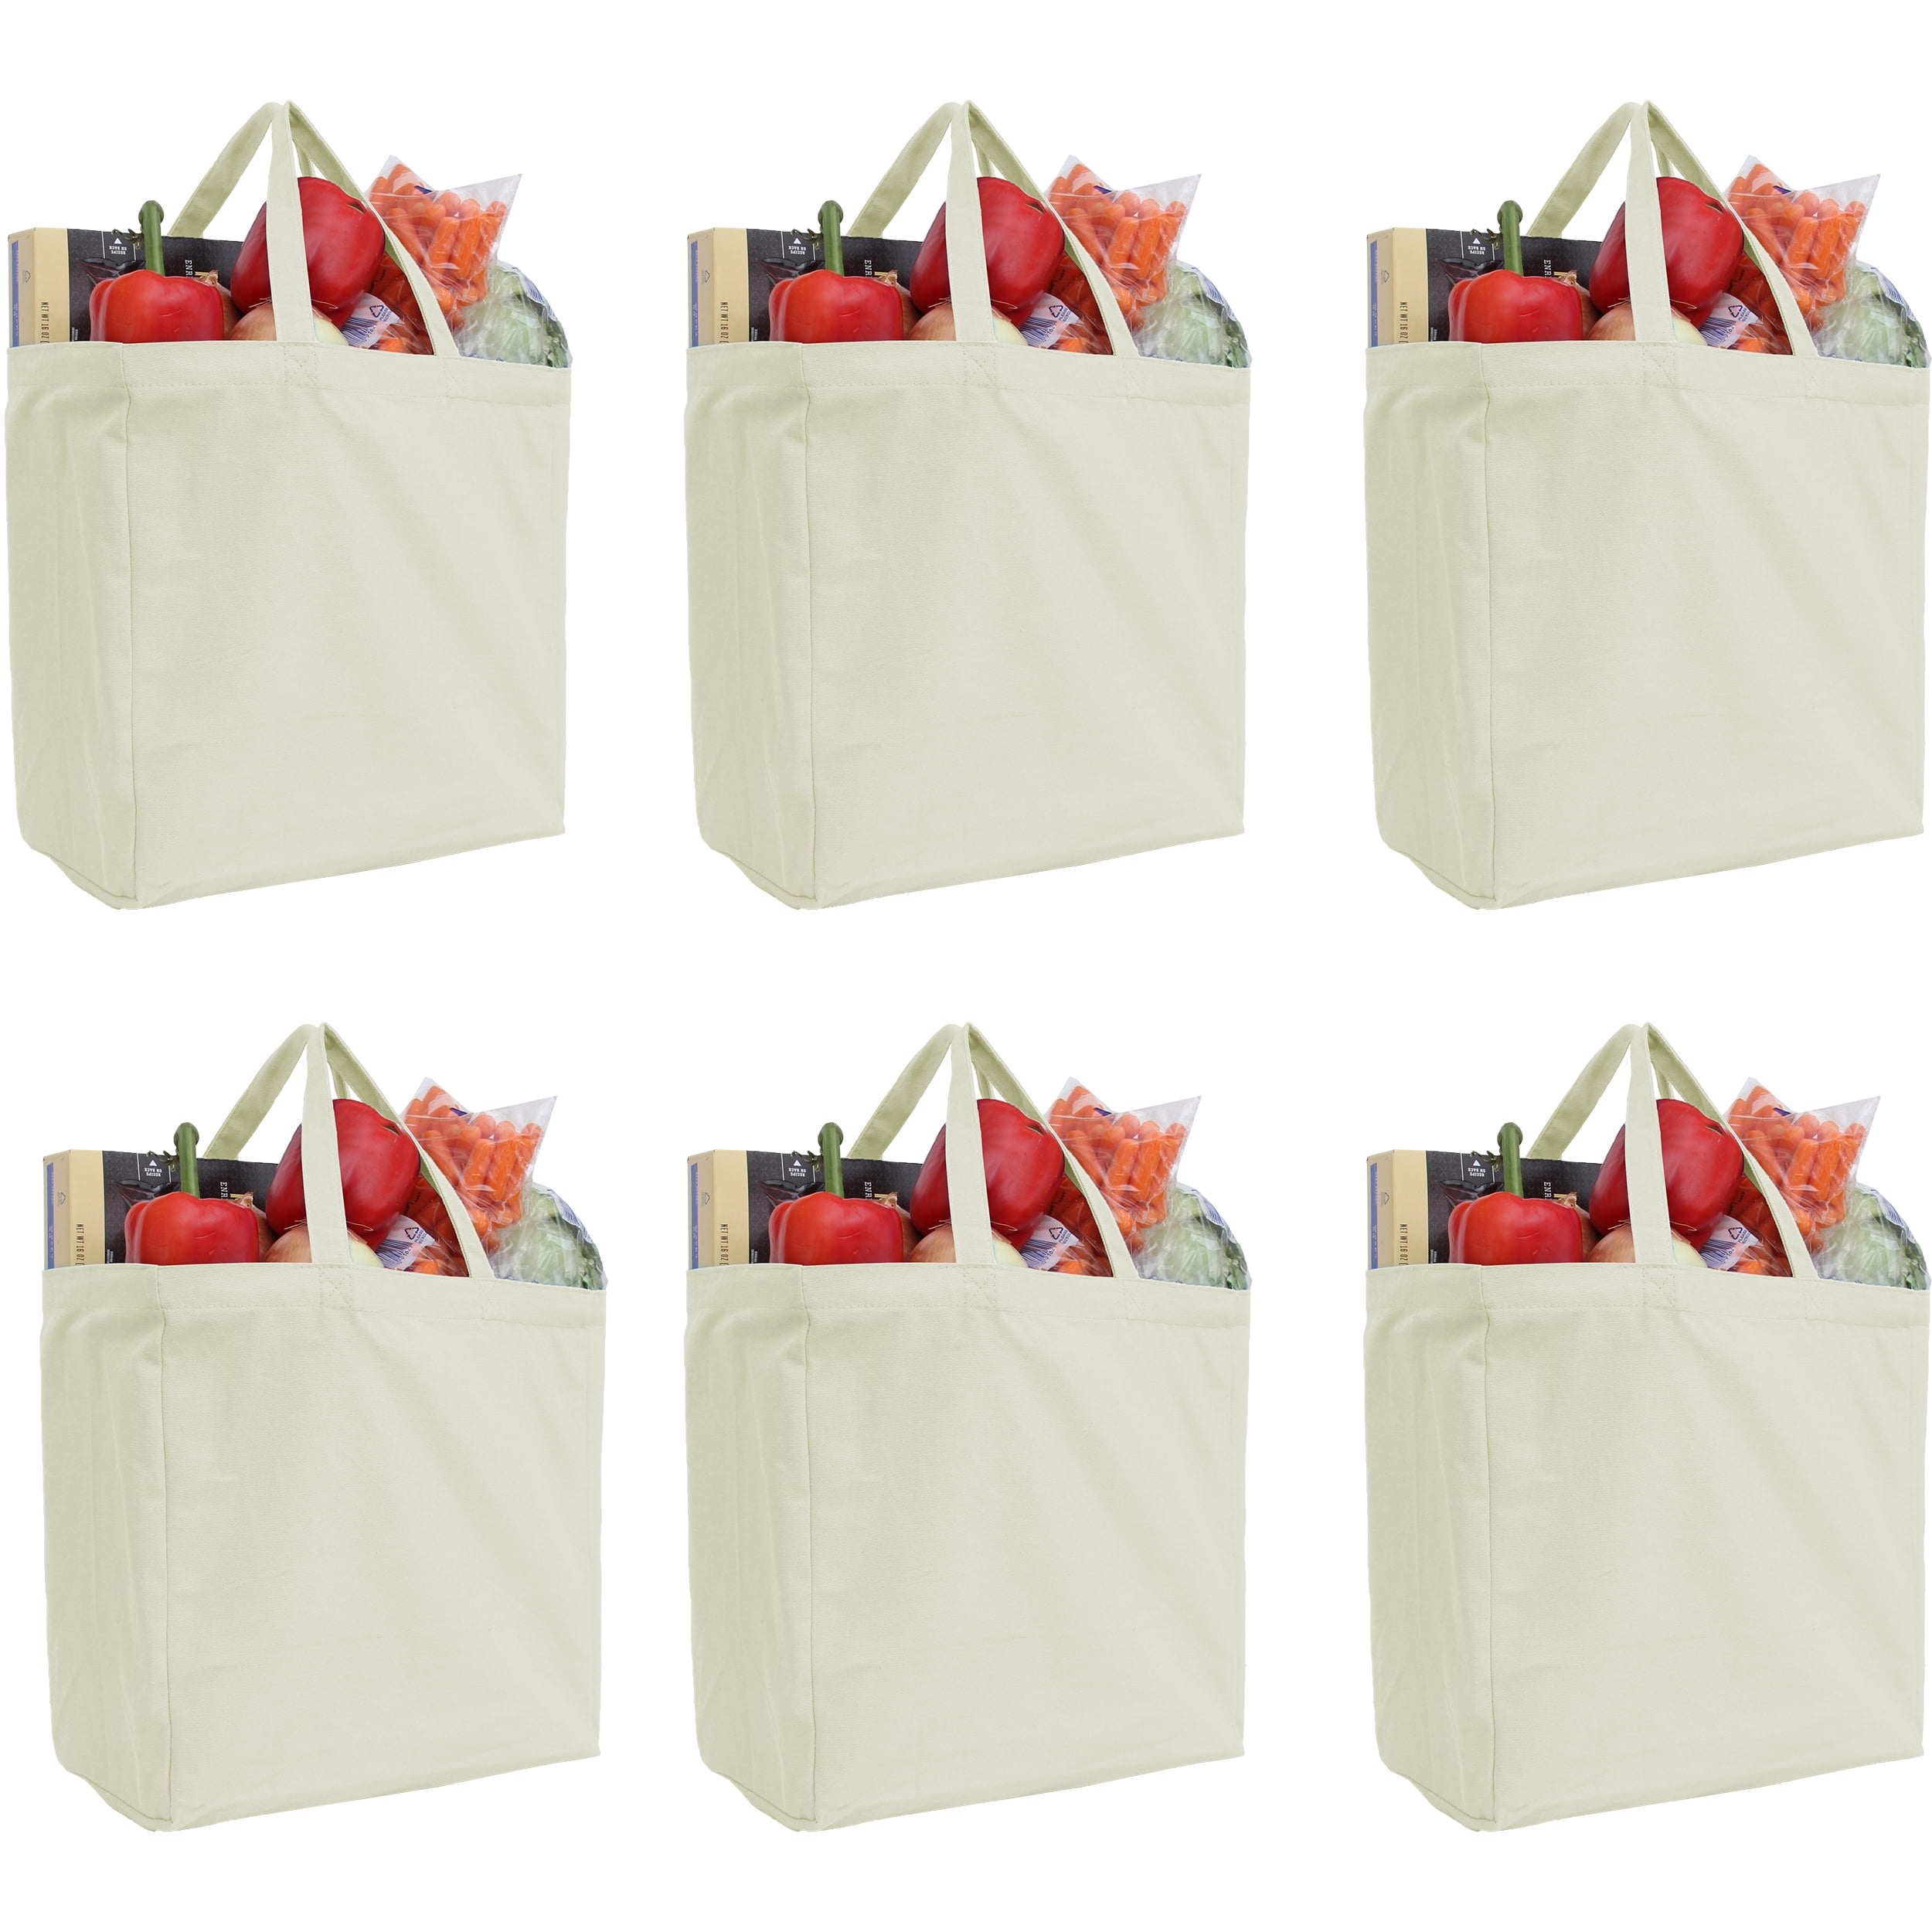 Reusable Heavy Duty 100% Cotton Canvas Grocery Bags 3 Pack Red 